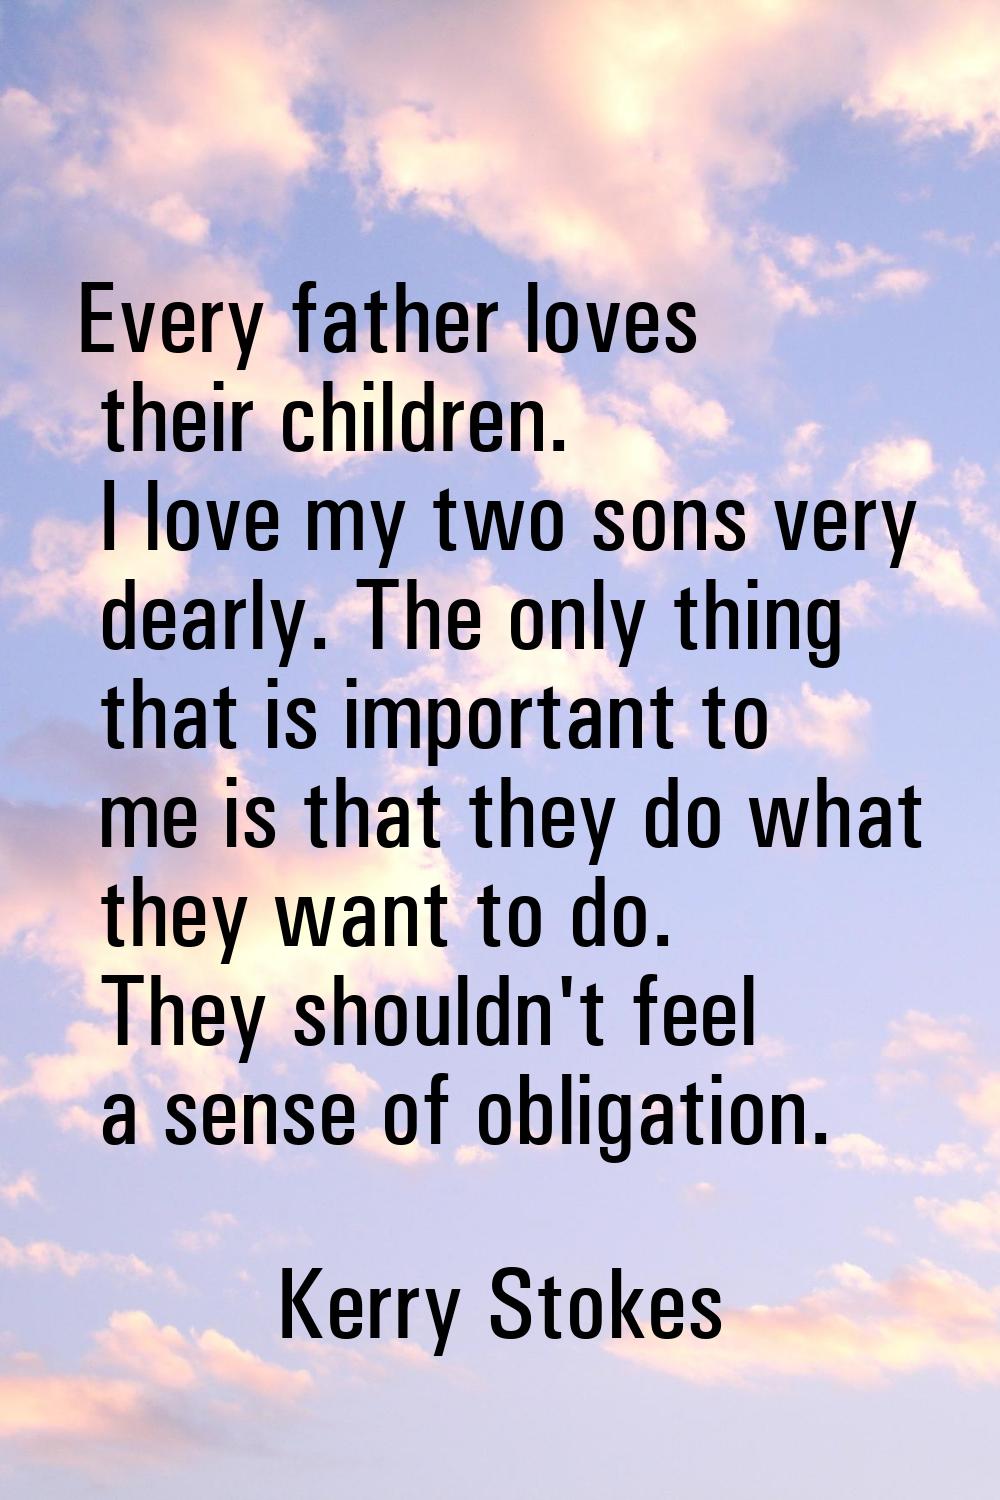 Every father loves their children. I love my two sons very dearly. The only thing that is important